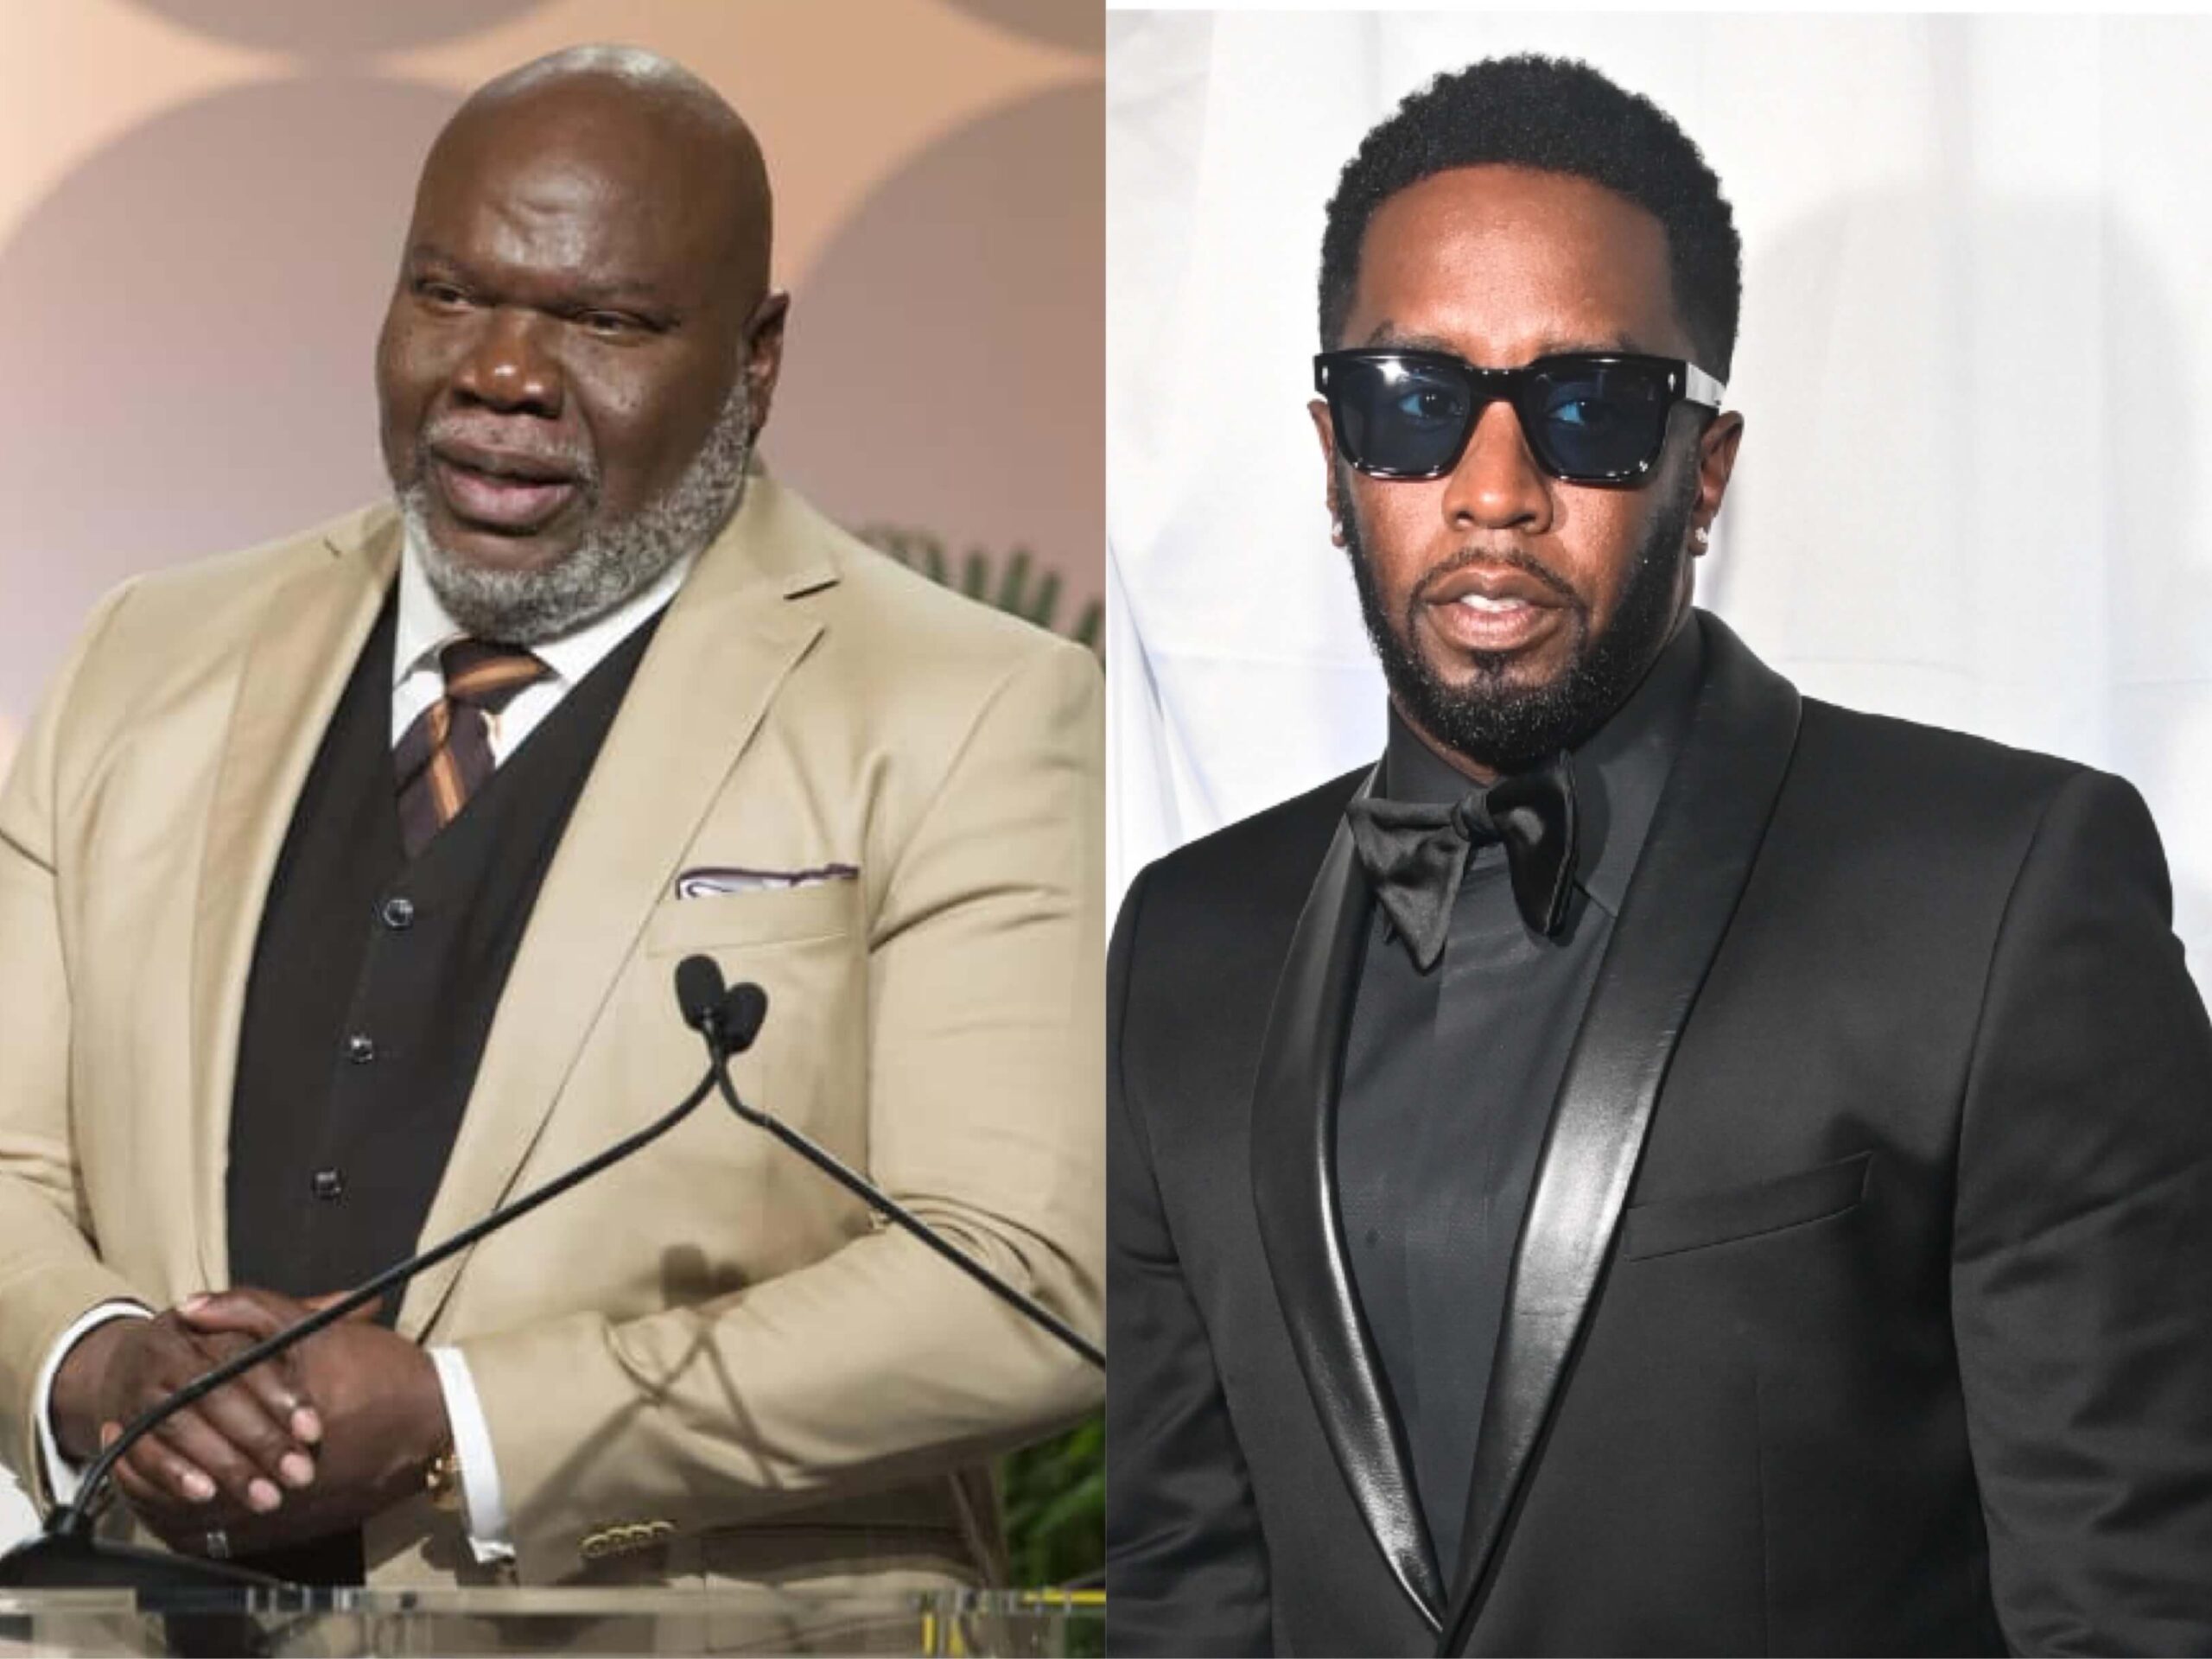 Unequivocally False and Baseless': Bishop T.D. Jakes Issues Statement  Denouncing Explosive Allegations Linking Him to Sean 'Diddy' Combs